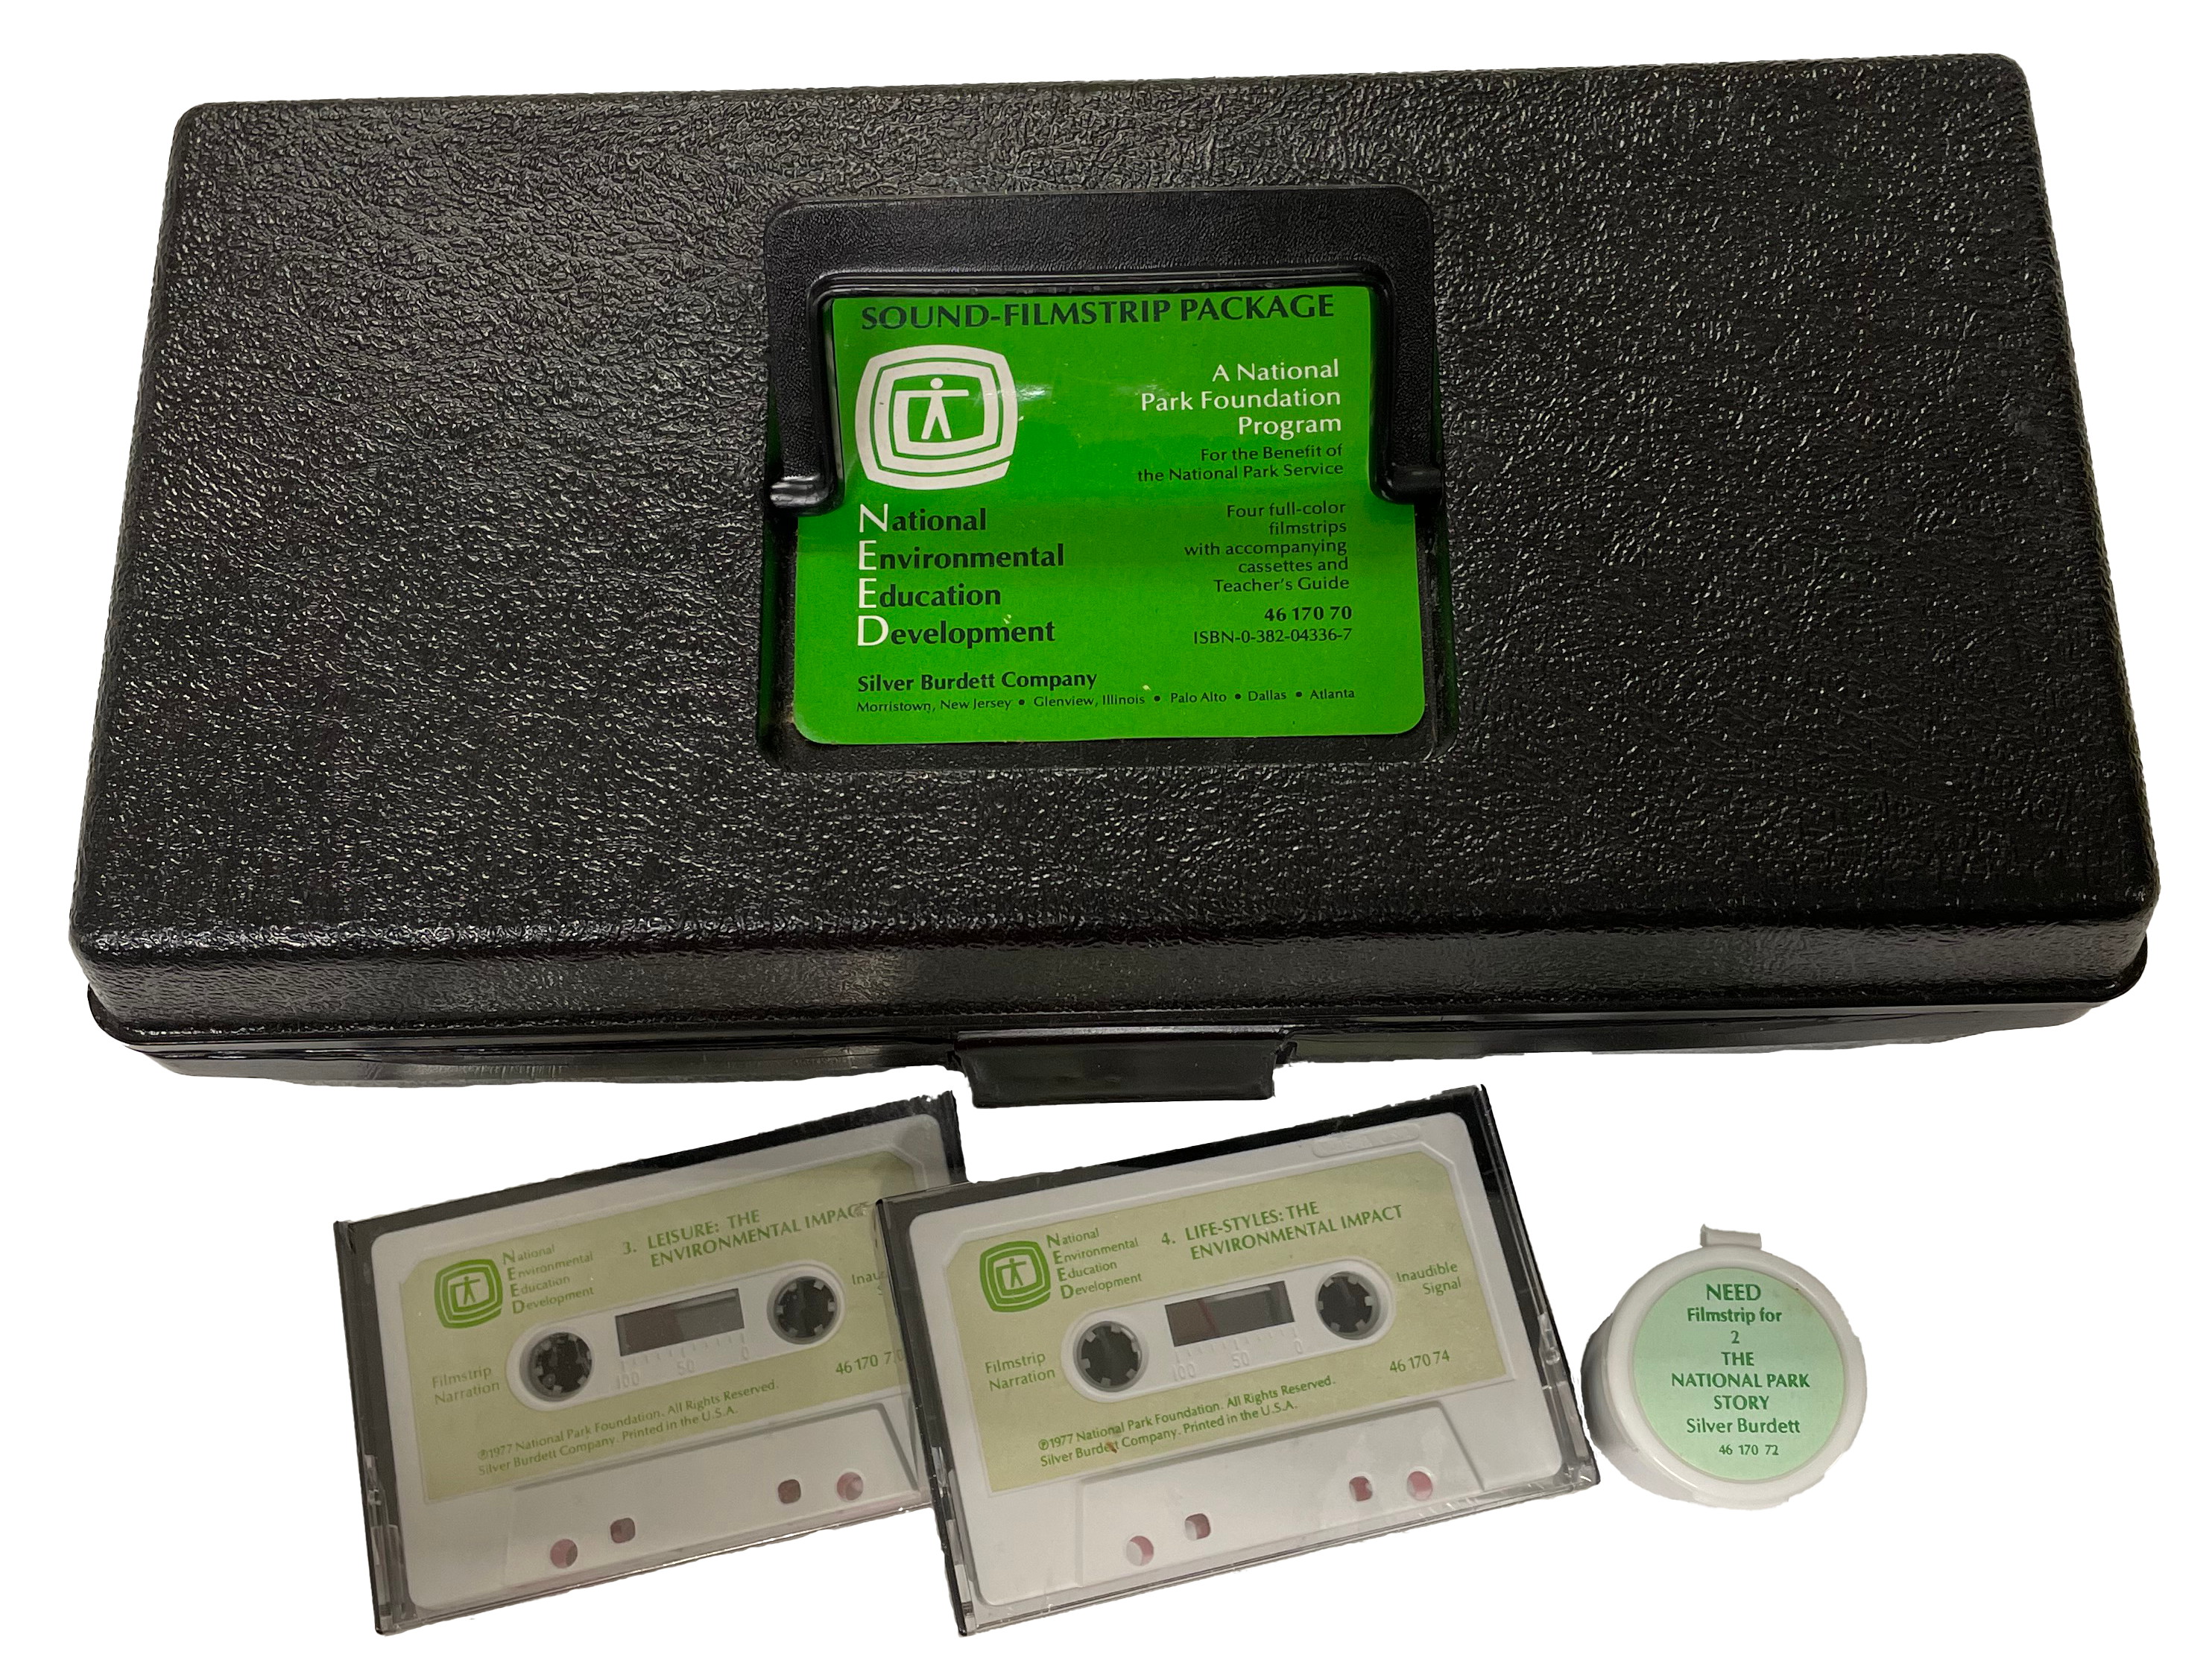 Plack plastic box with green label. Two audiocassettes and a filmstrip cannister beside it.